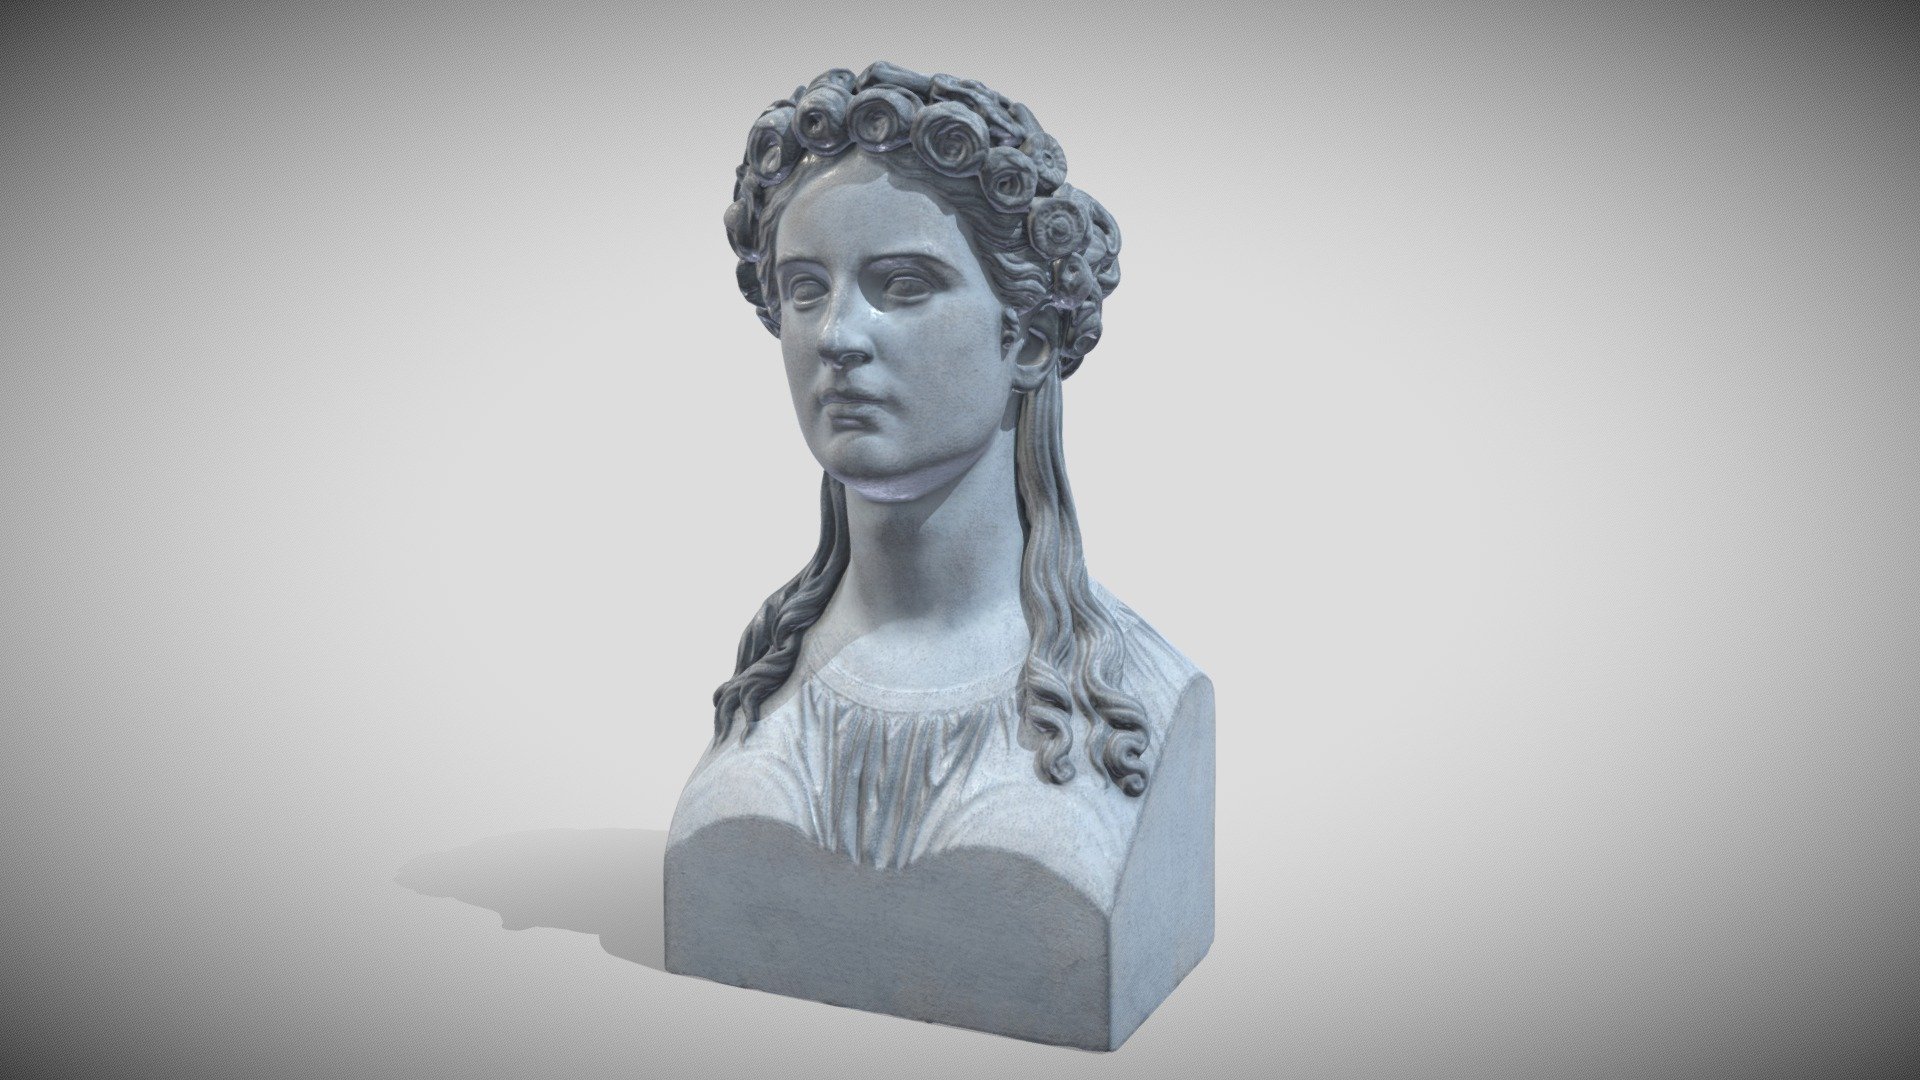 Original very nice 3D Scan from the Thorvaldsens Museum

https://www.thorvaldsensmuseum.dk/en/collections/work/A861

here the Painted Gaming Version LR... 3d model